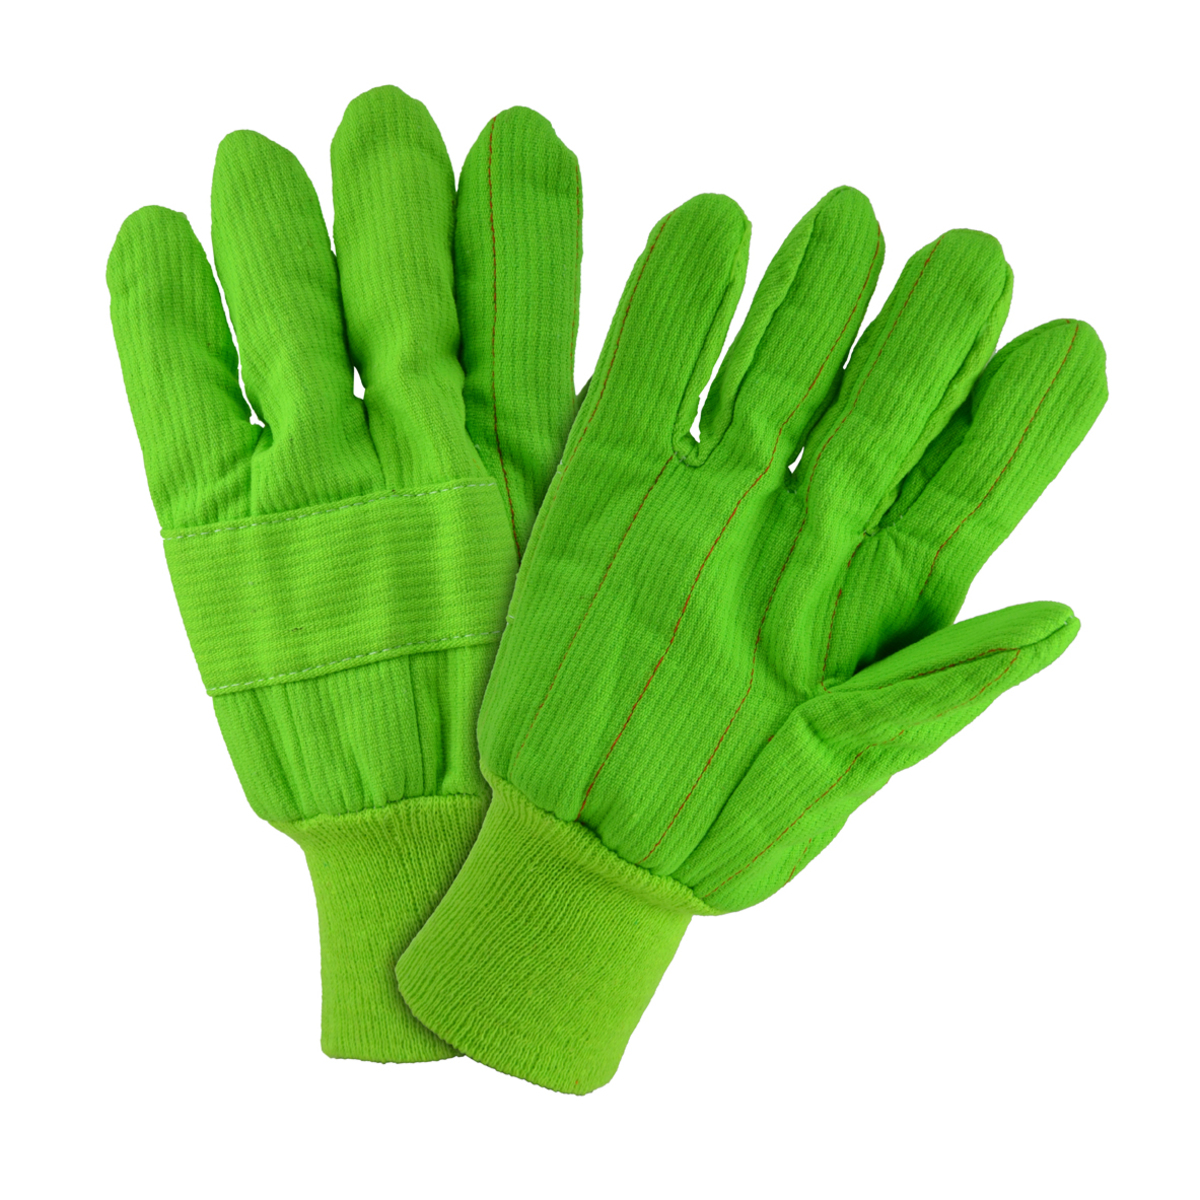 PIP® Hi-Viz Green Large Cotton And Polyester General Purpose Gloves With Knit Wrist